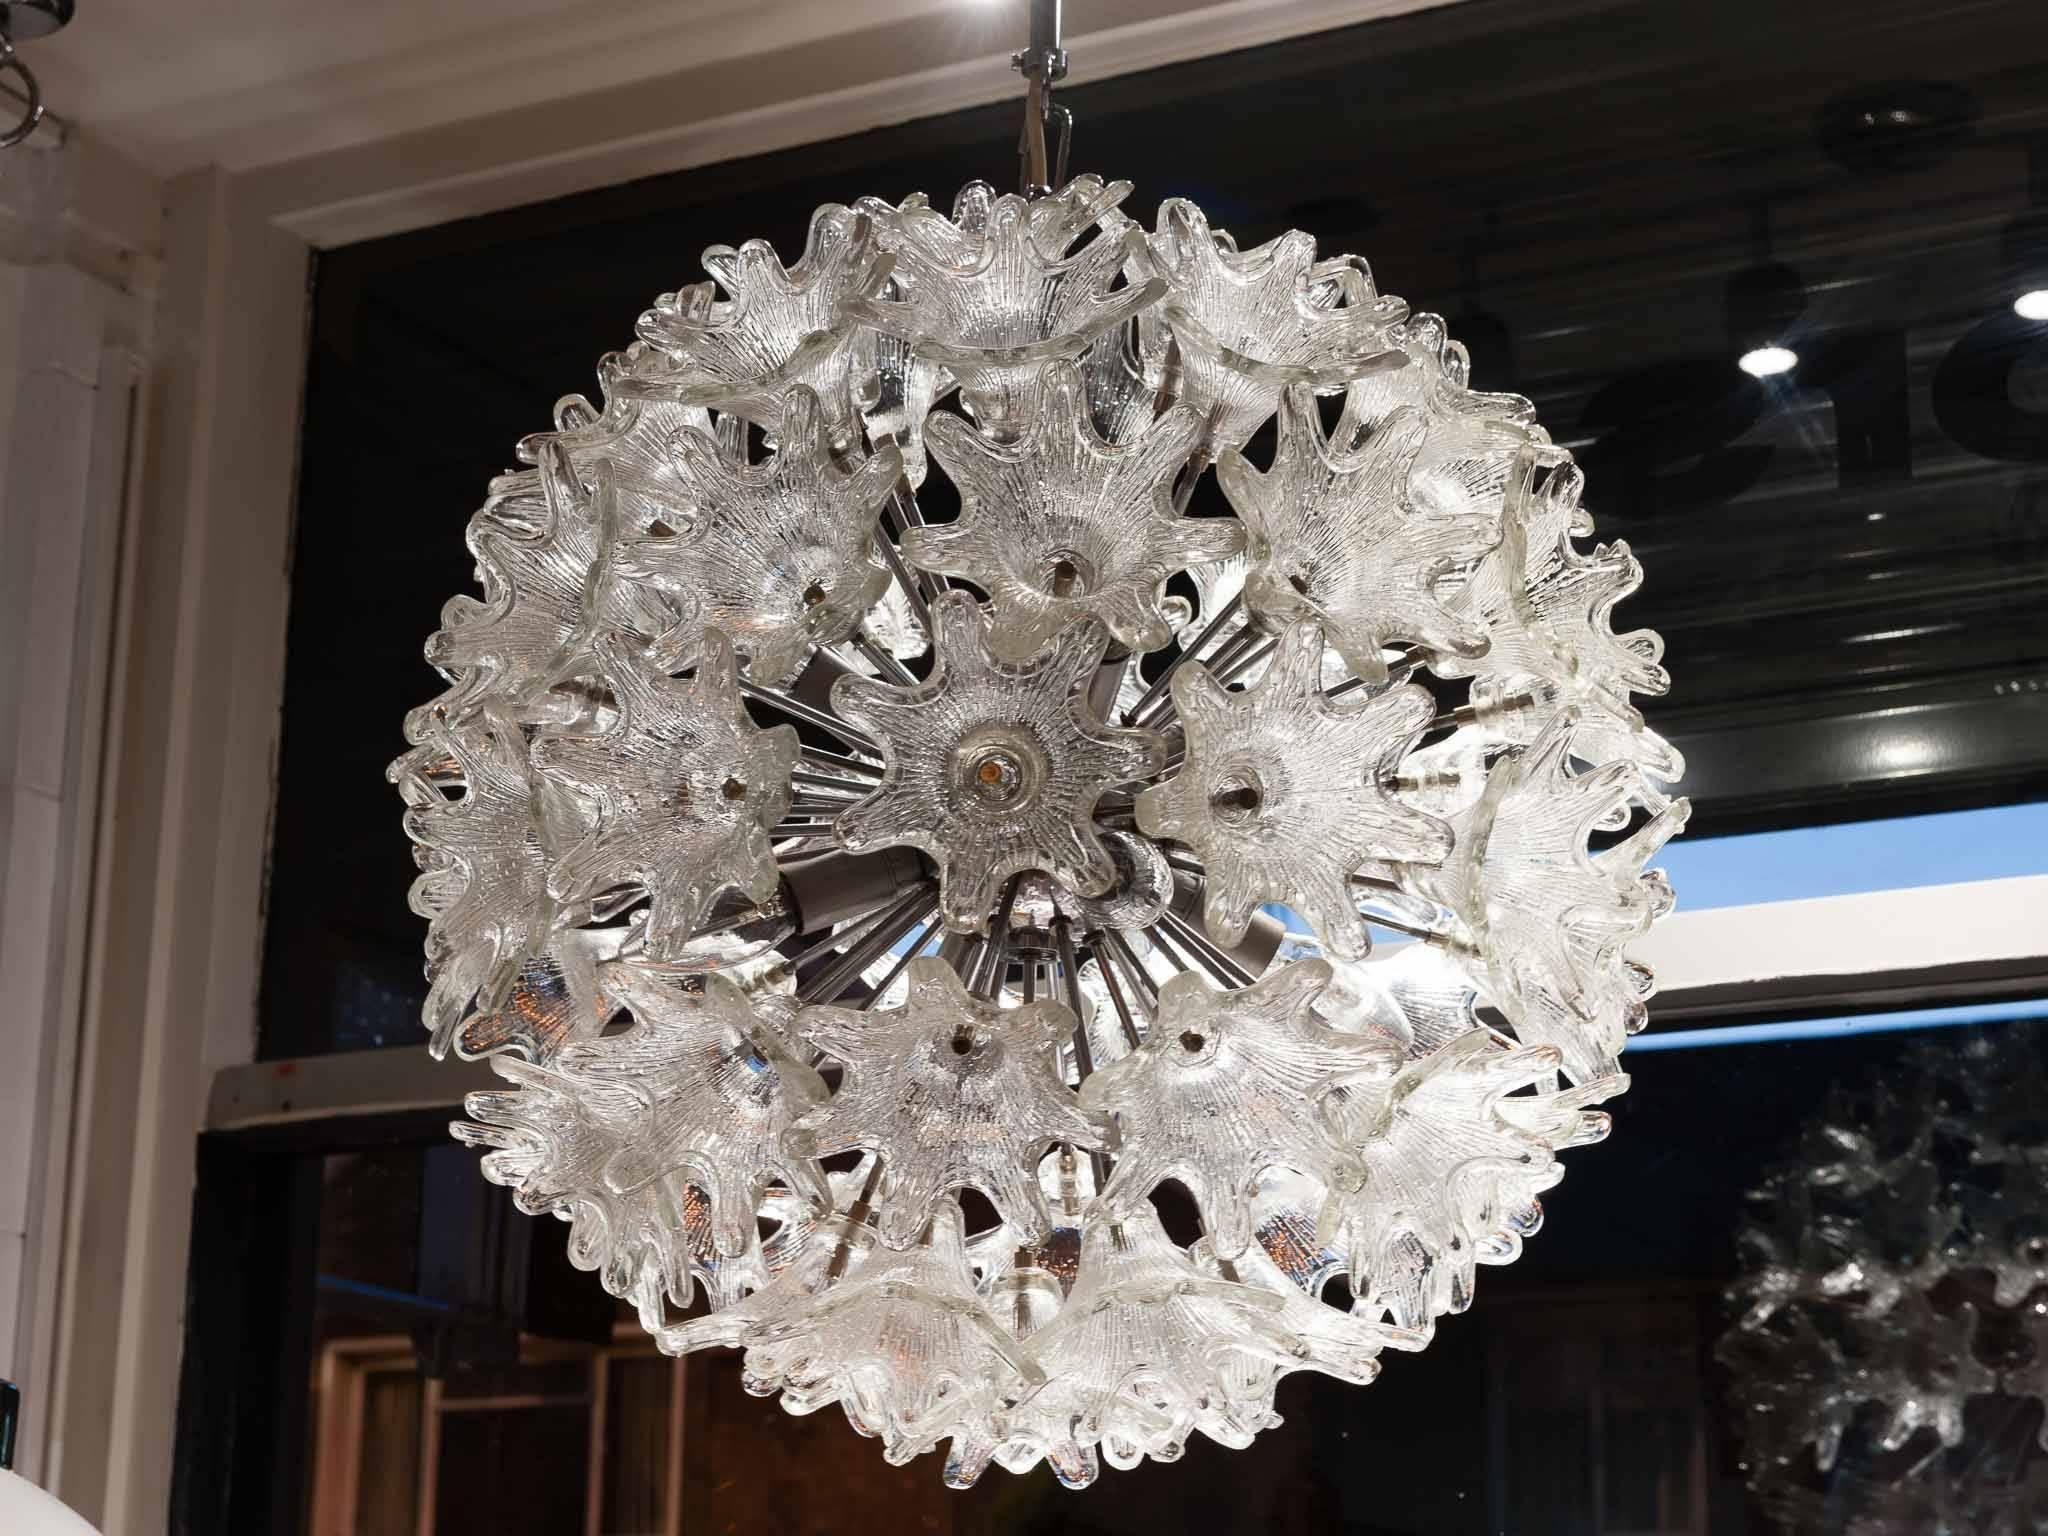 Italian Mid-Century Modern Murano floral Sputnik chandelier with textured clear glass flowers designed by Mazzega in the 1960s. The chandelier features a chrome-plated metal frame with handblown Murano glass flowers suspended on rods that interlock